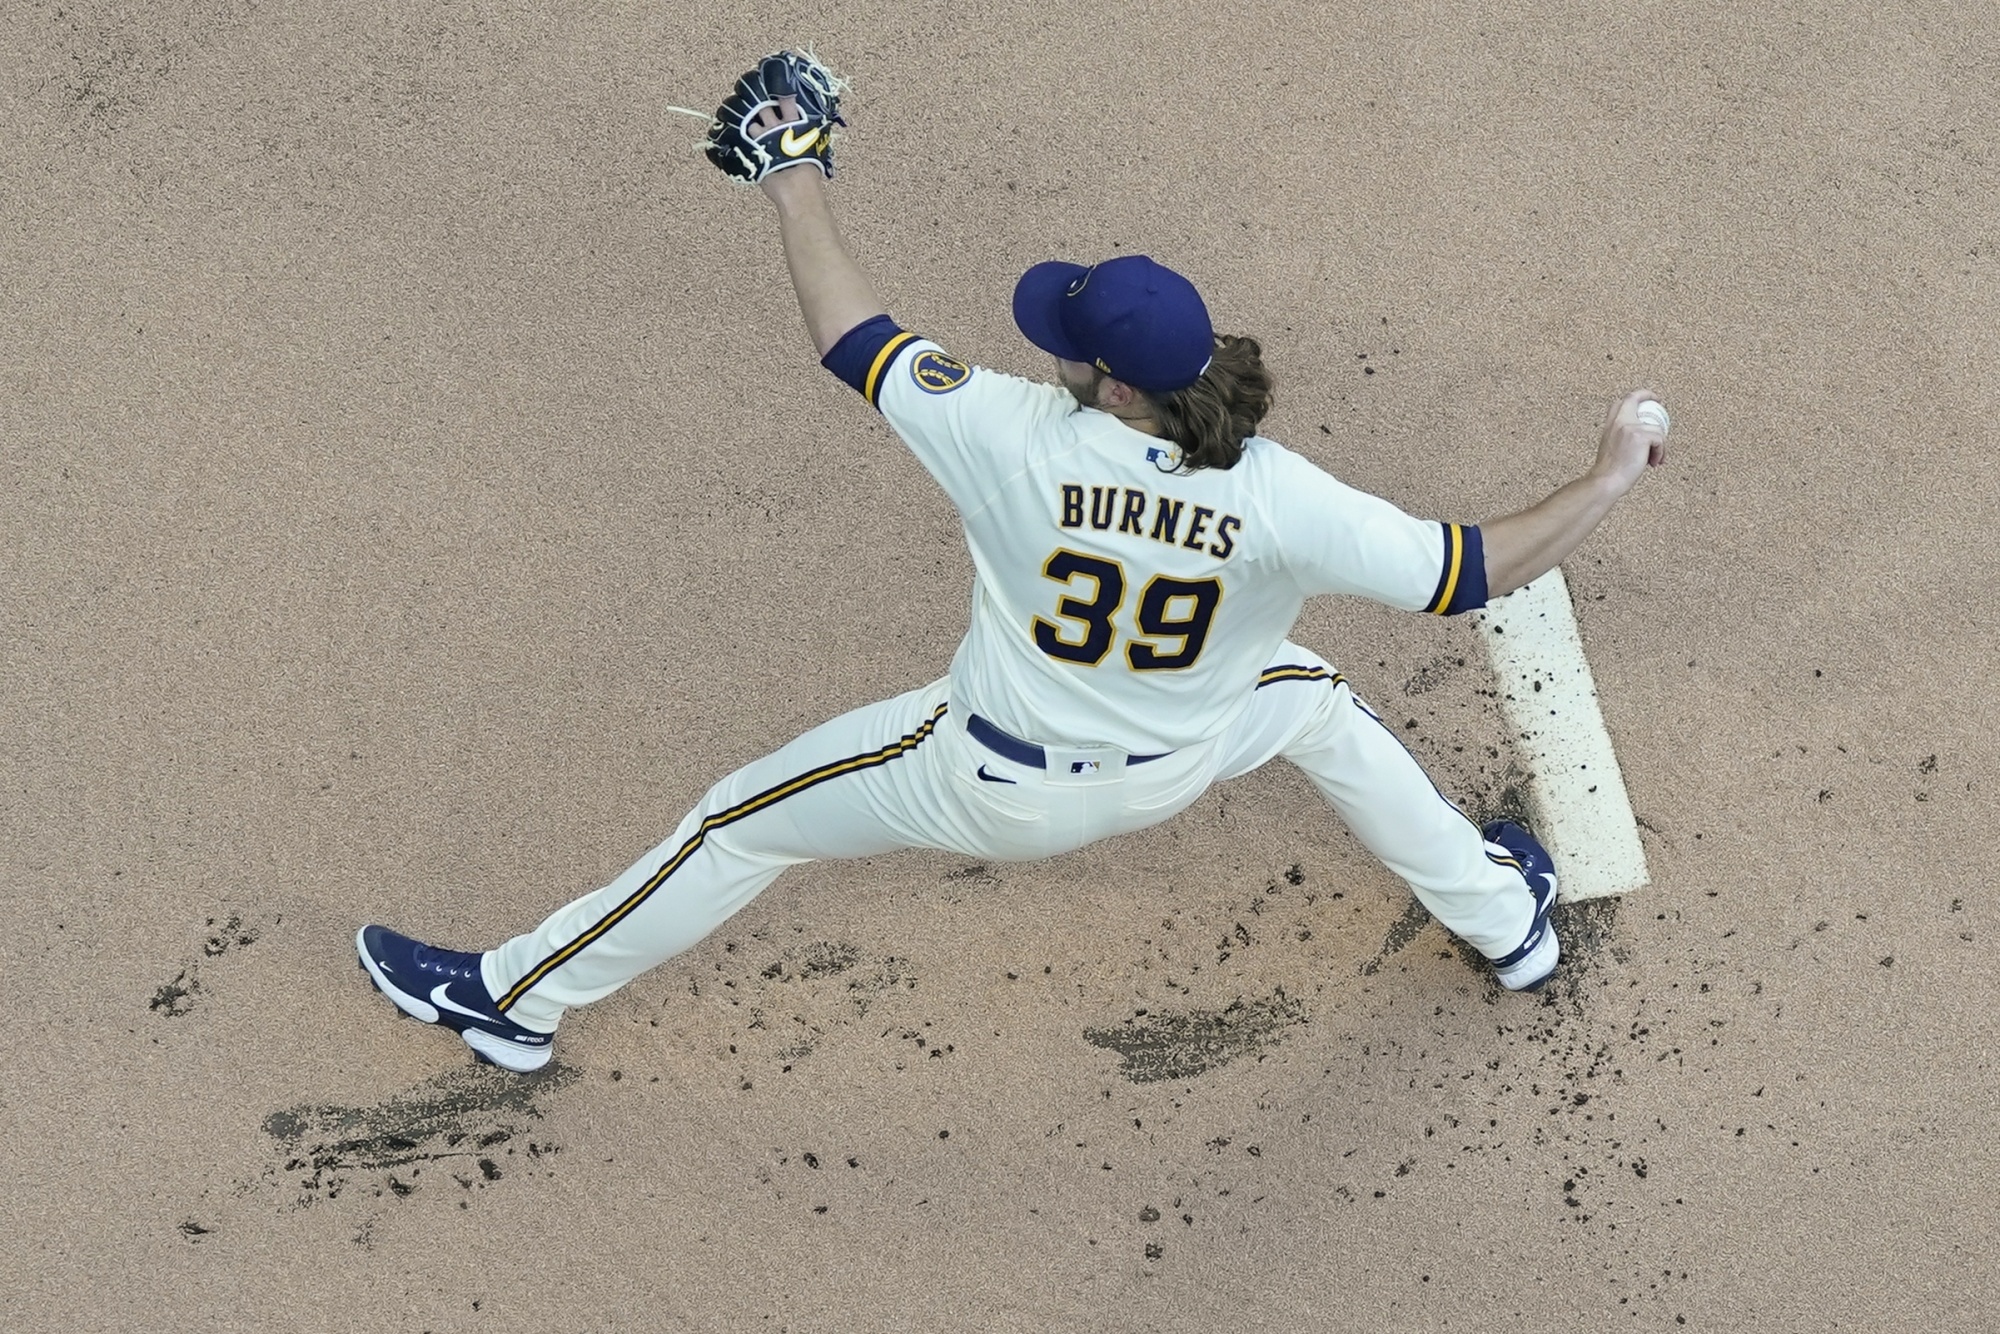 Brewers News: Corbin Burnes Added to 2023 All-Star Game, Devin